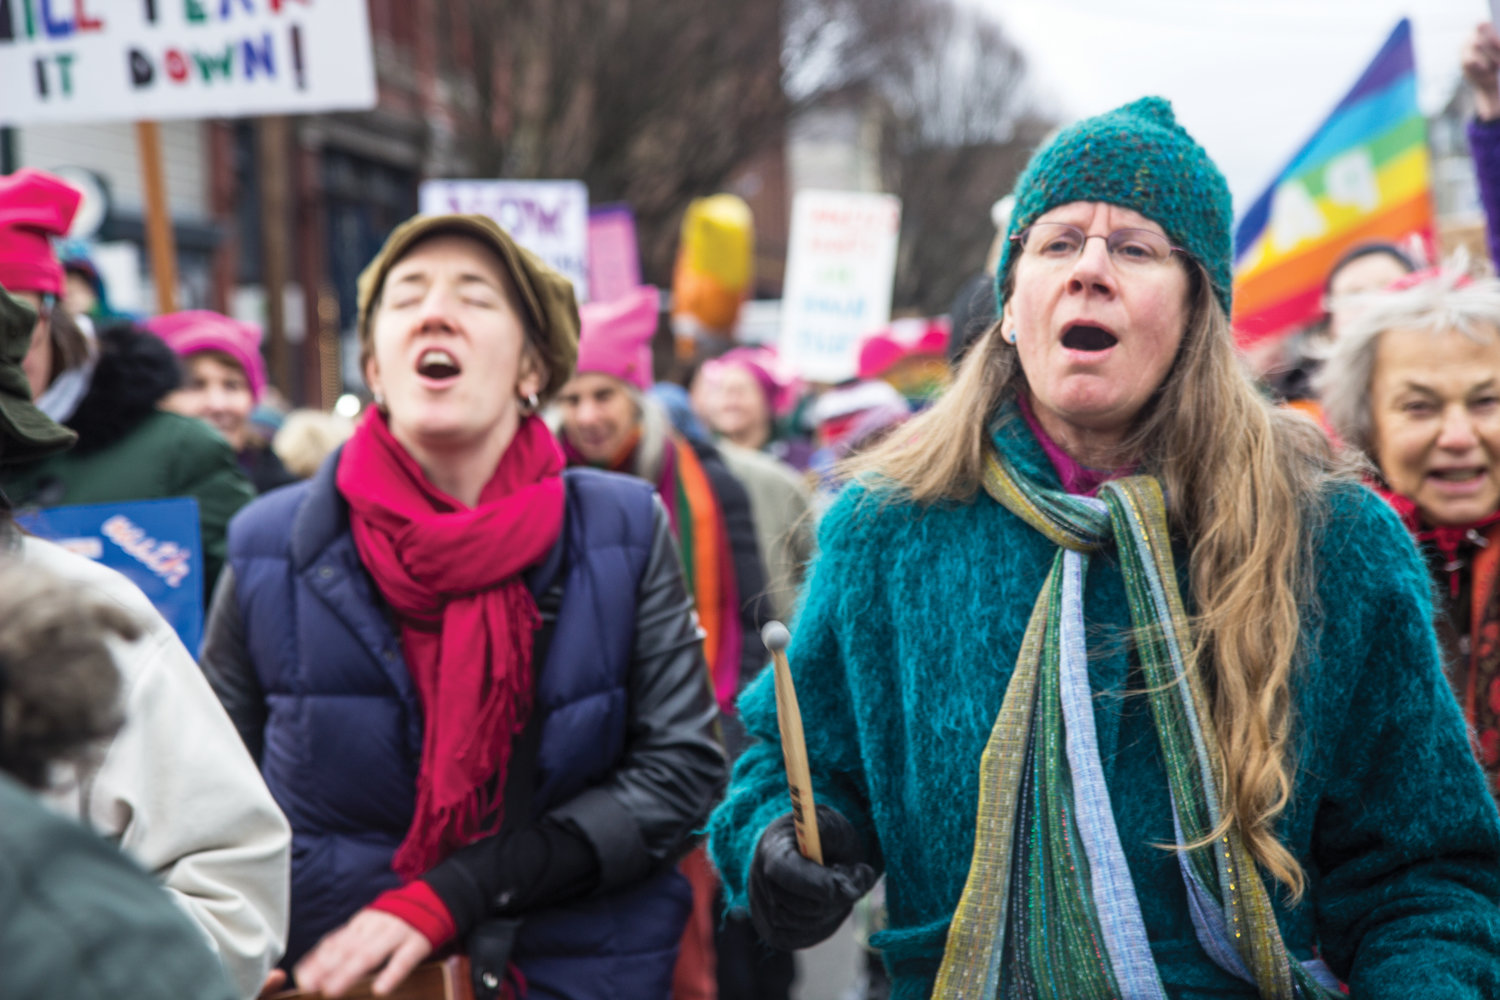 Musicians Aimee Ringle, left, and Gretchen Sleicher lead the crowd in protest songs as they march down Water Street.